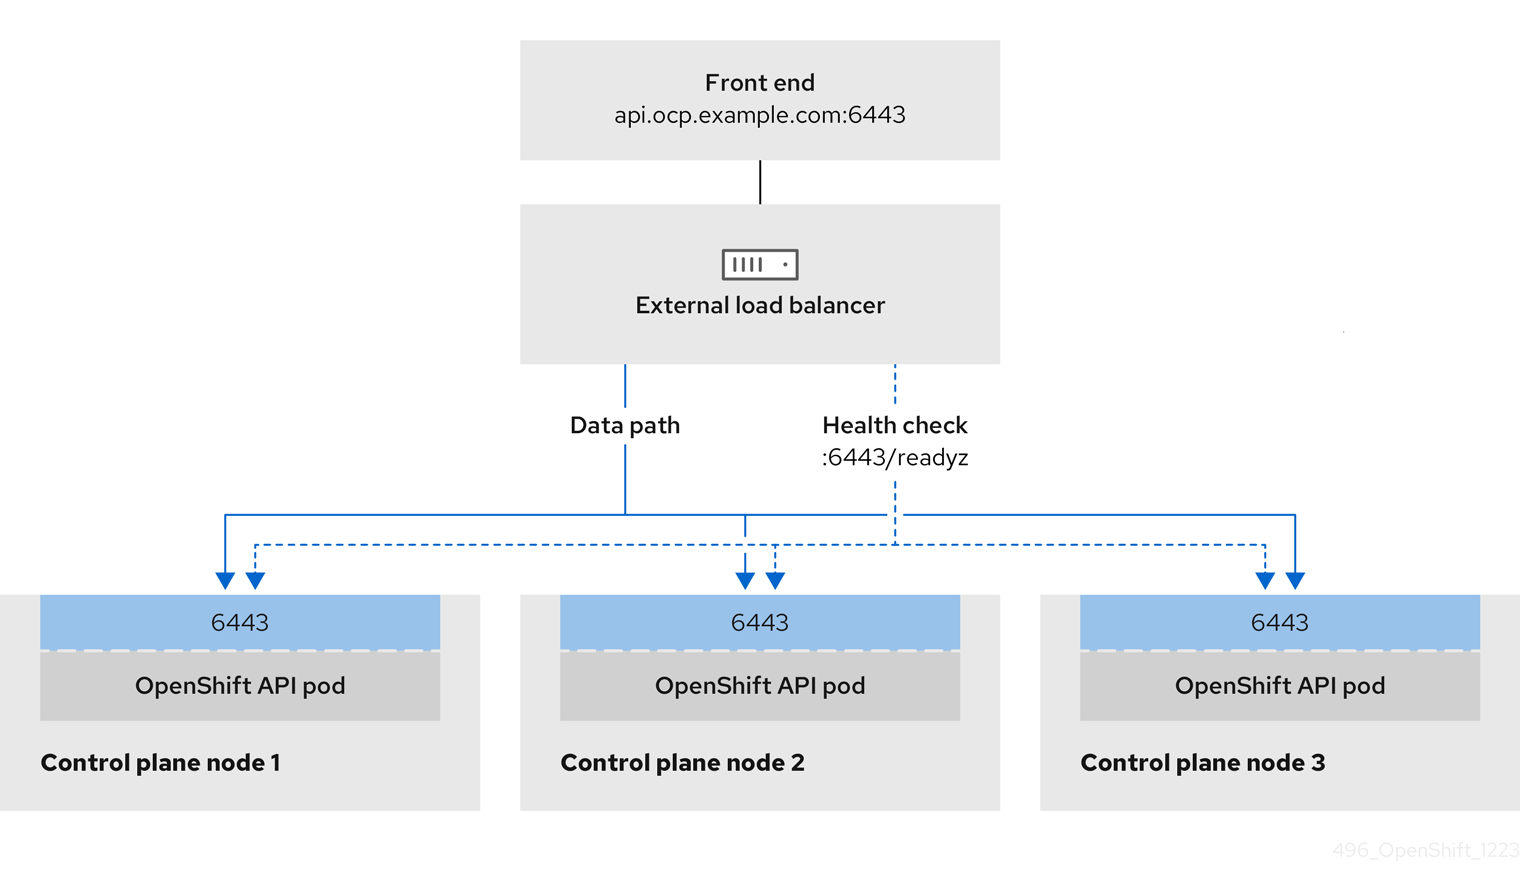 An image that shows an example network workflow of an OpenShift API operating in an OpenShift Container Platform environment.